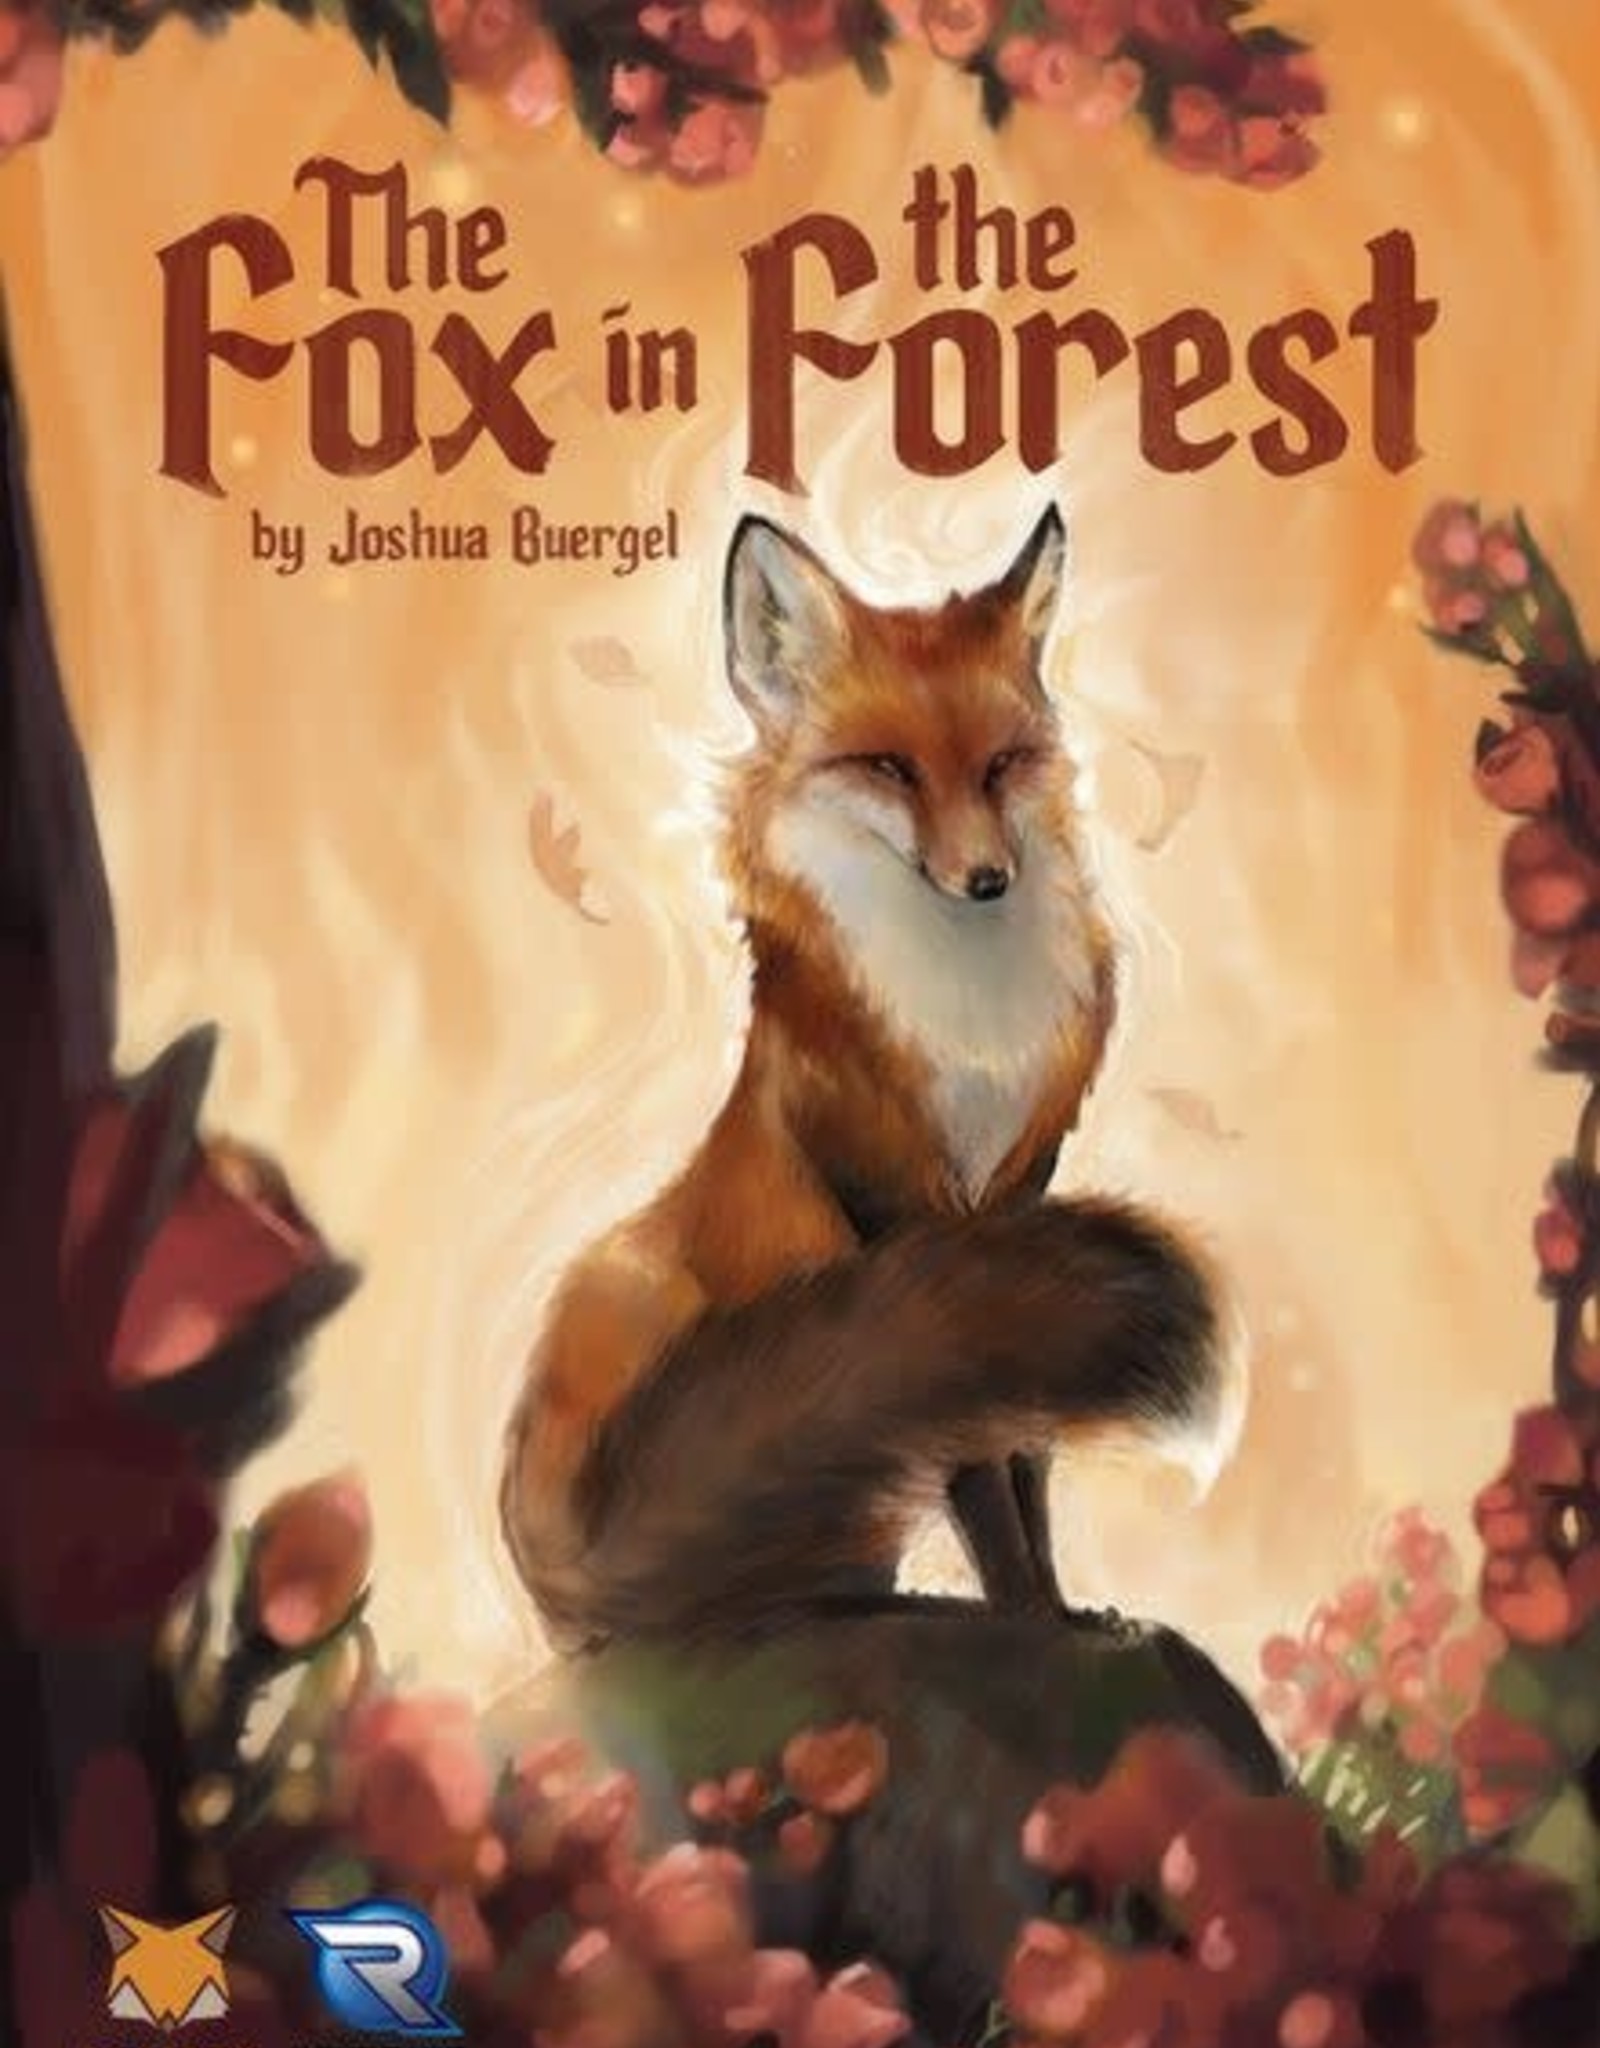 Renegade The Fox in the Forest